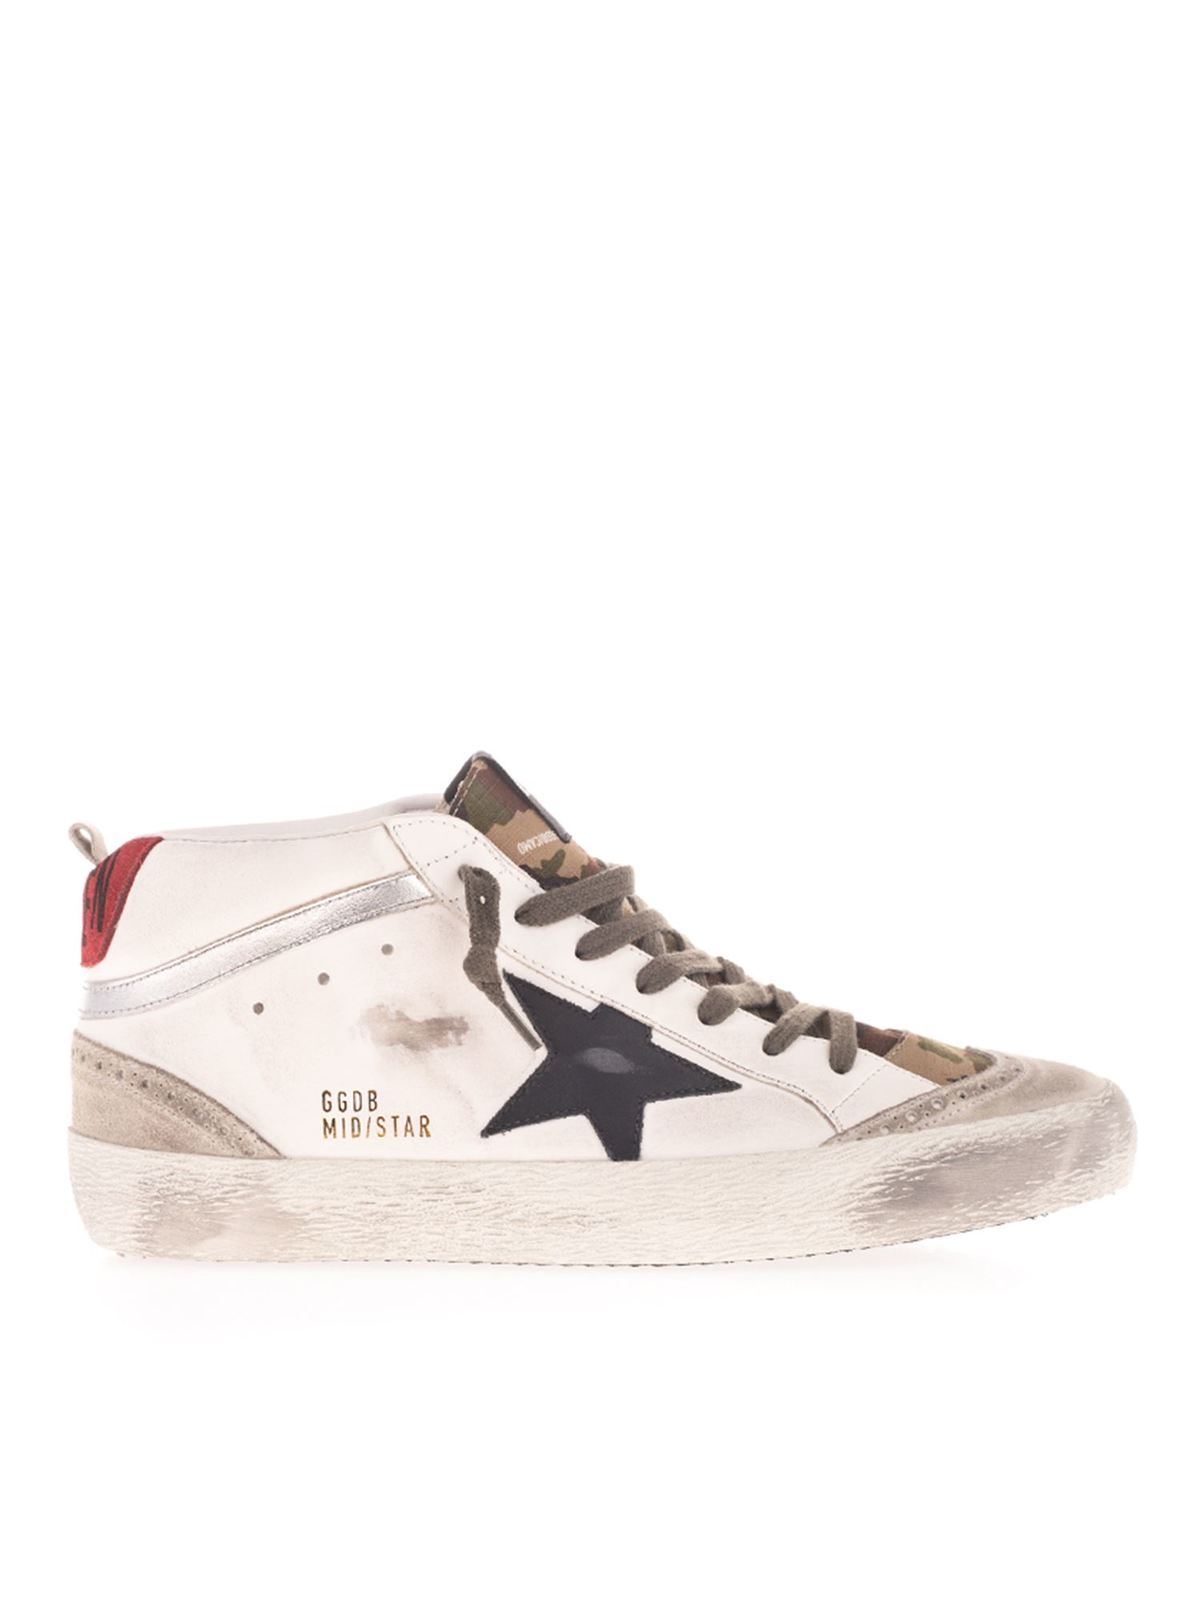 Golden Goose - Midstar sneakers in white and camouflage - trainers ...